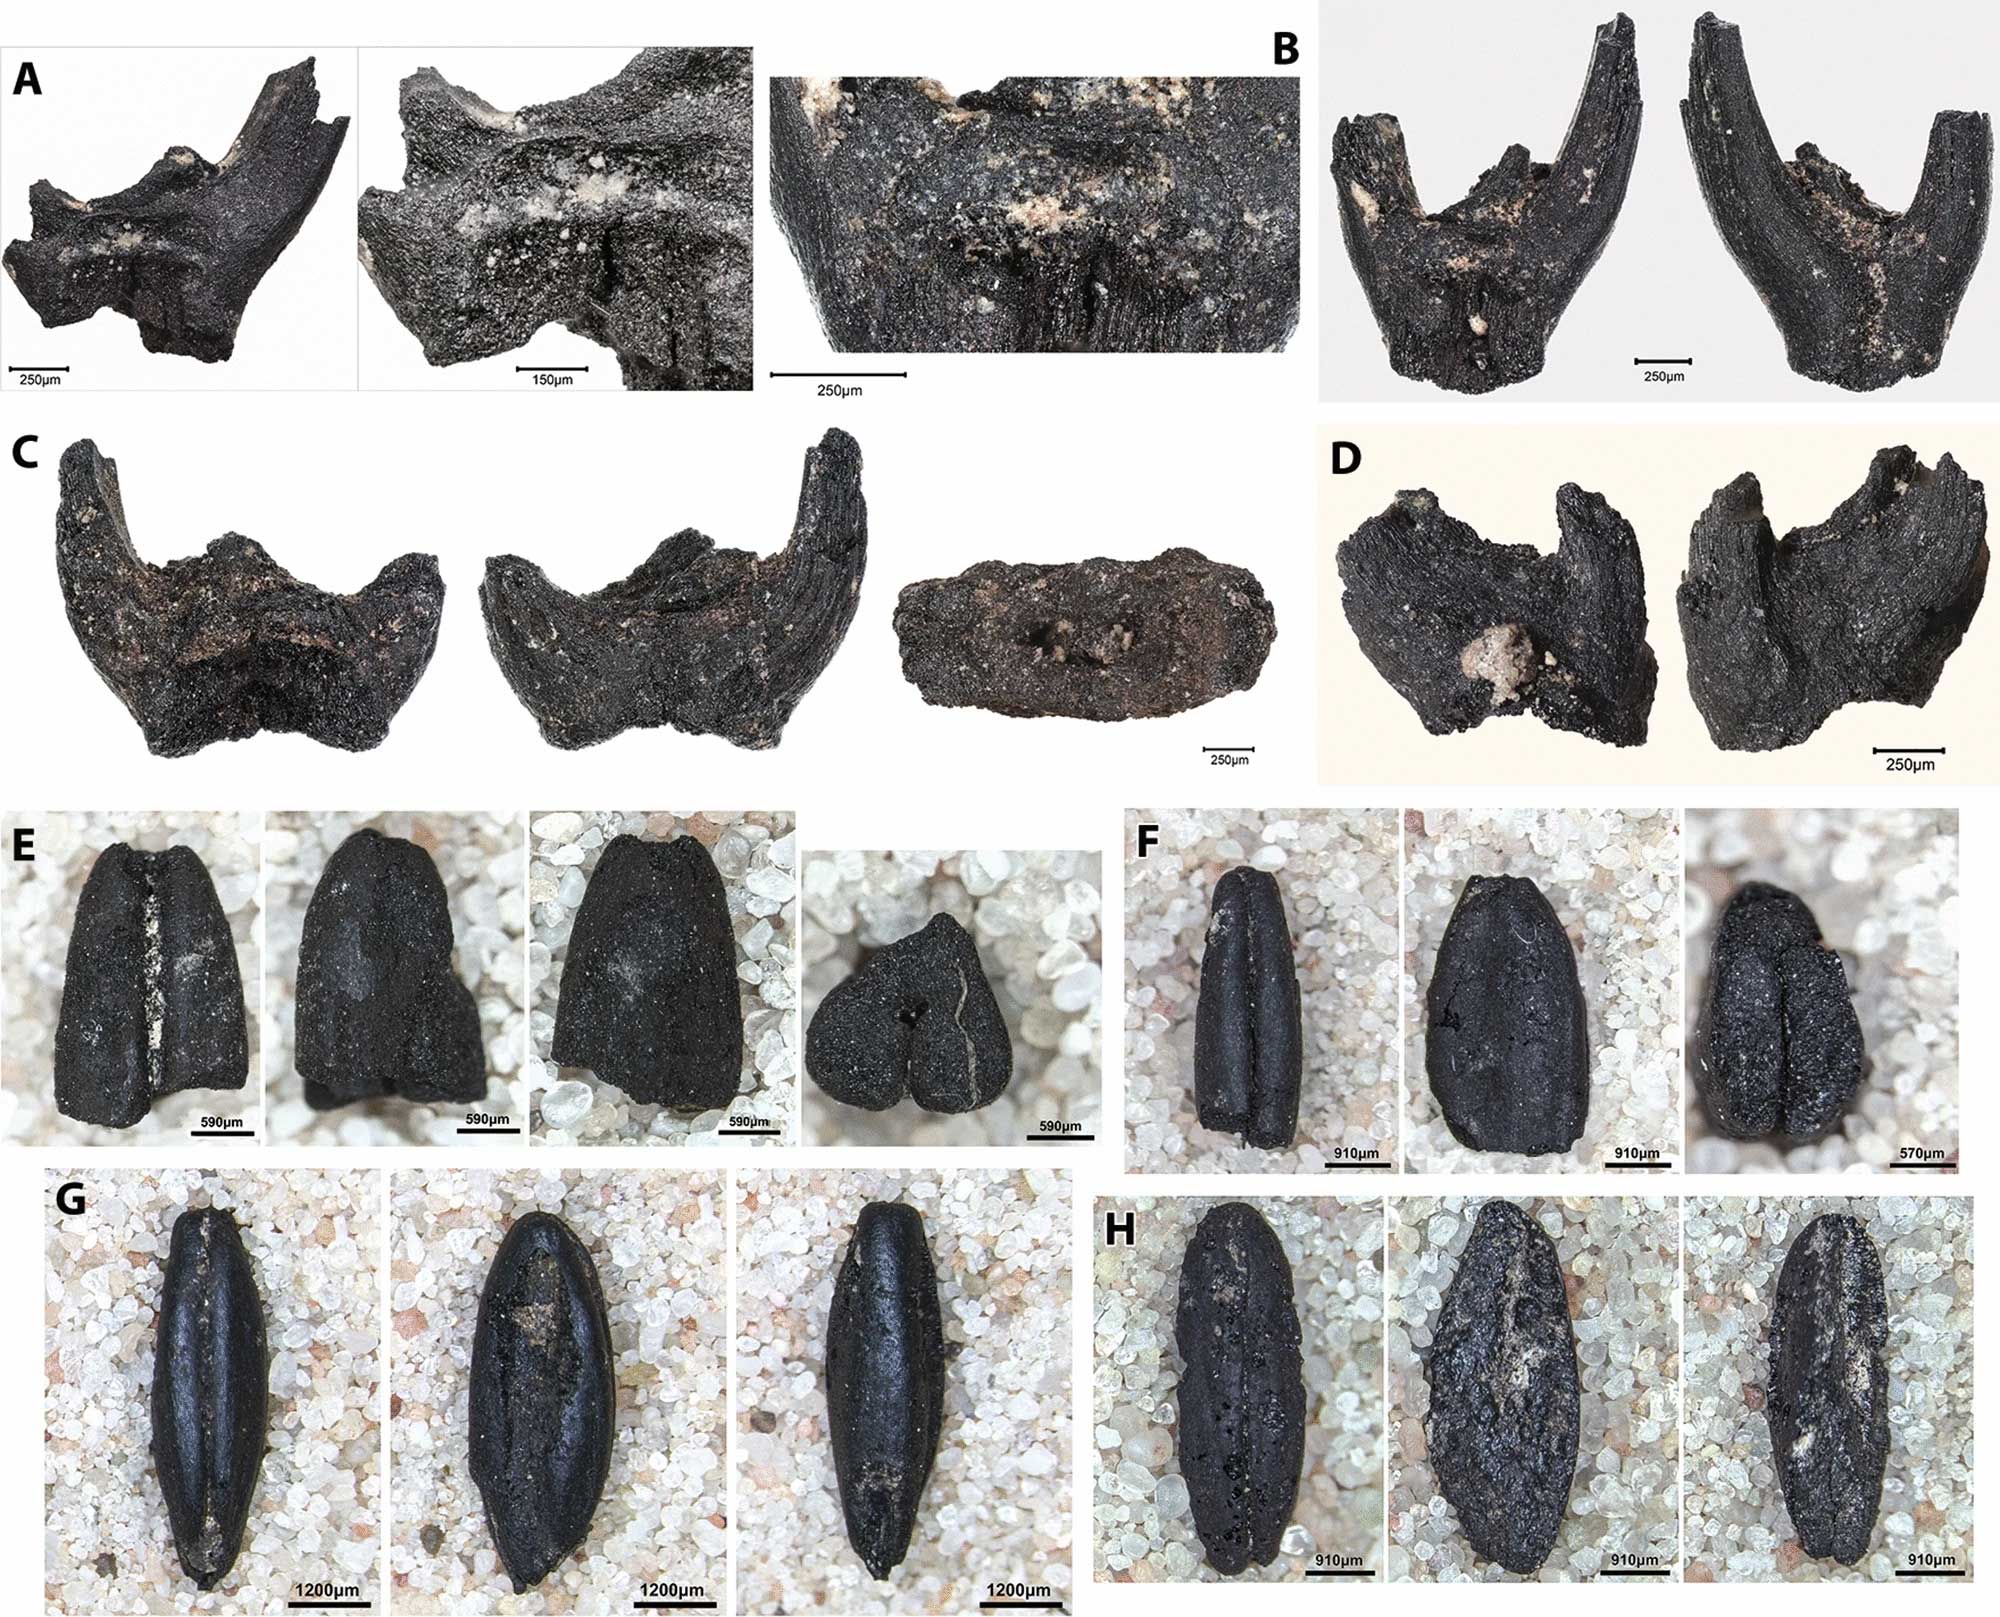 Multipanel figure of photographs showing parts of wild wheat spikelets and wheat grains from an archaeological site in Turkey.